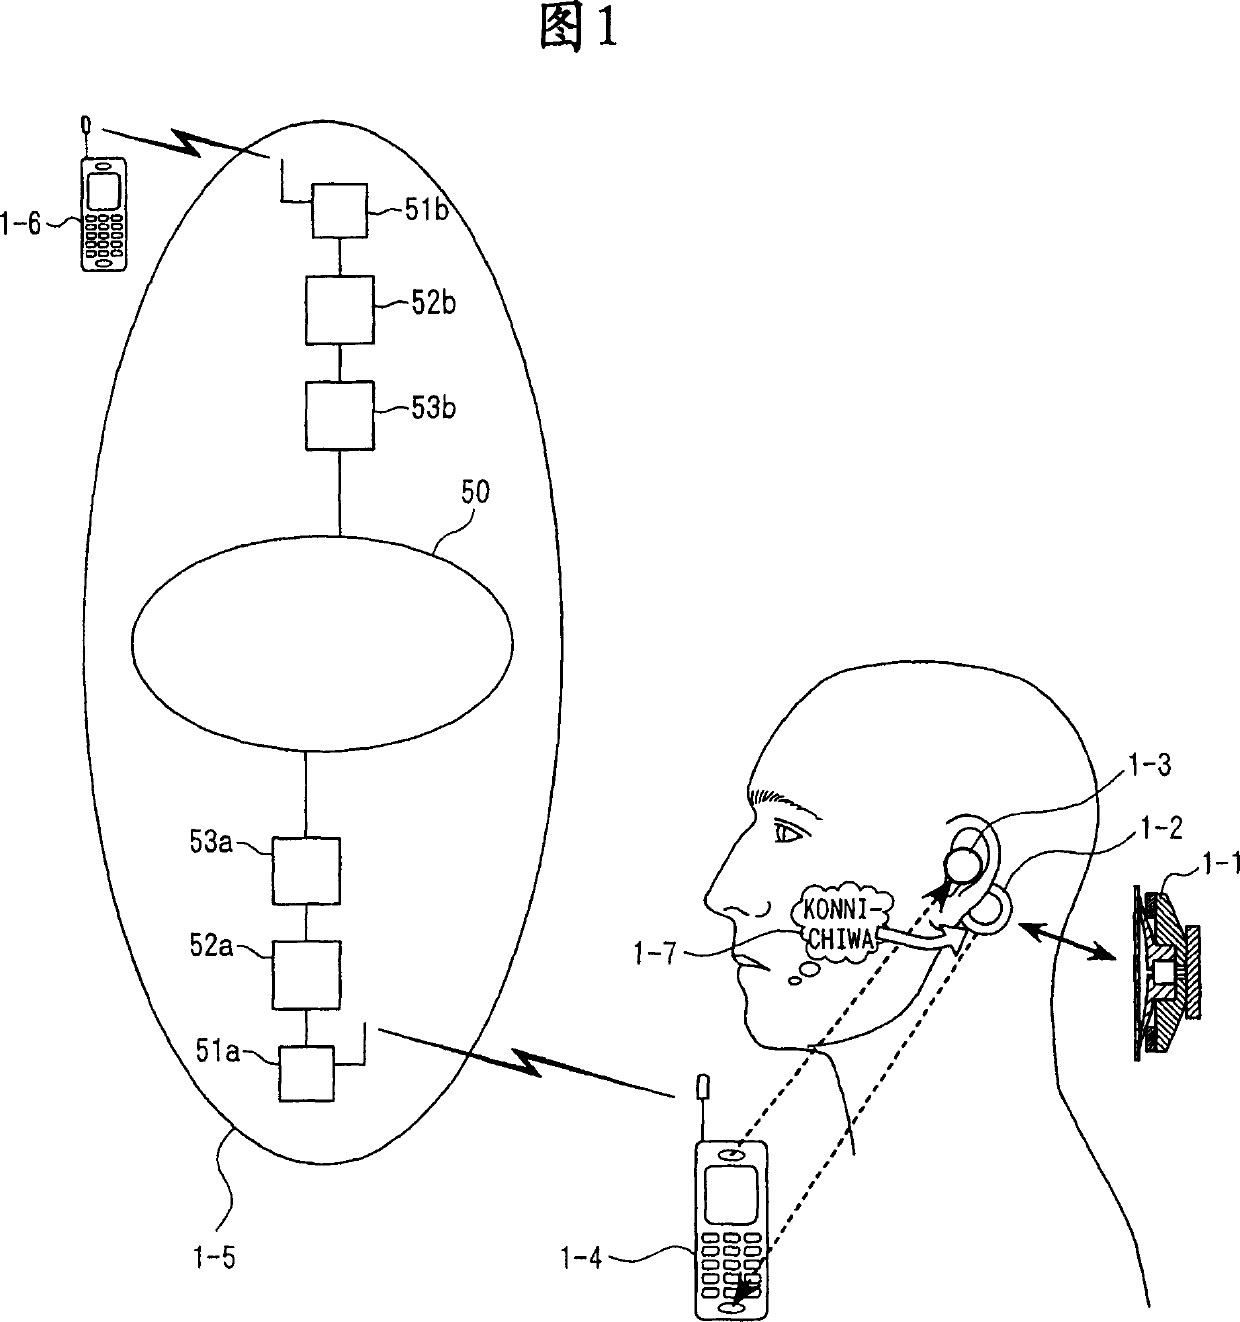 Microphone and communication interface system